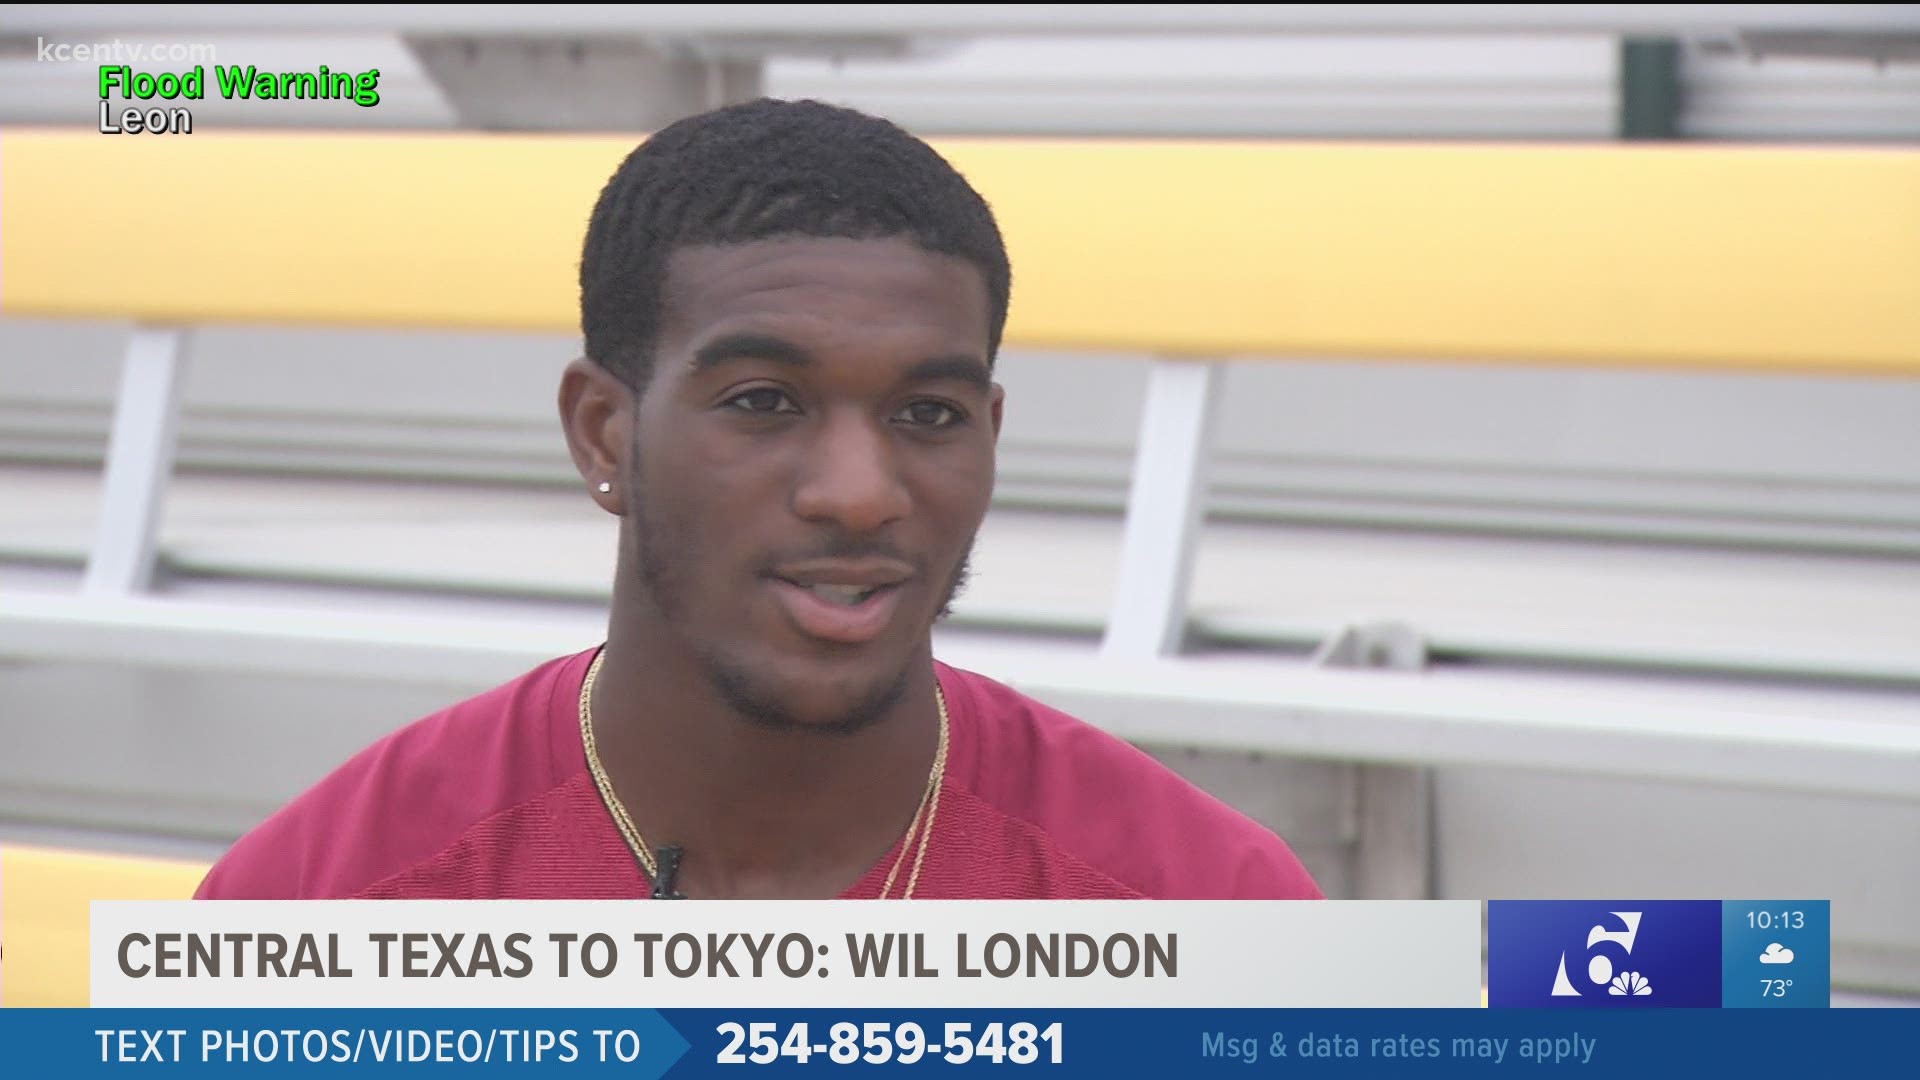 Thousands of athletes are working to land a spot in this summer's Tokyo Olympics and London is confident he'll be wearing red, white and blue when the time comes.